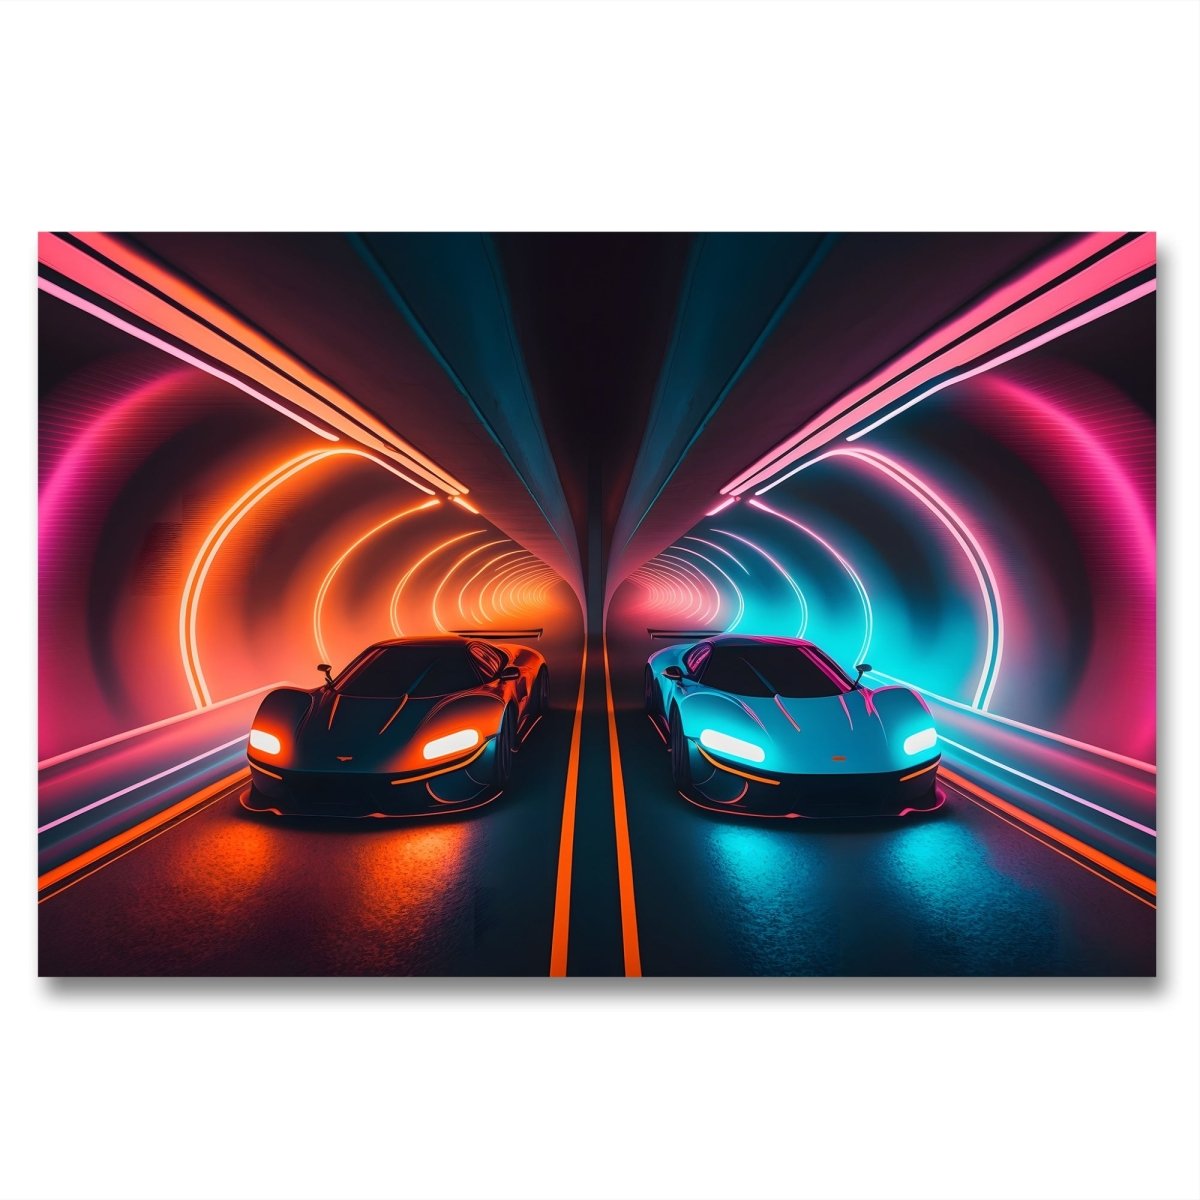 Two Sports cars through the neon Tunnel Ai Illustration Canvas Print Picture Wall Art - SPC220 - Art Fever - Art Fever